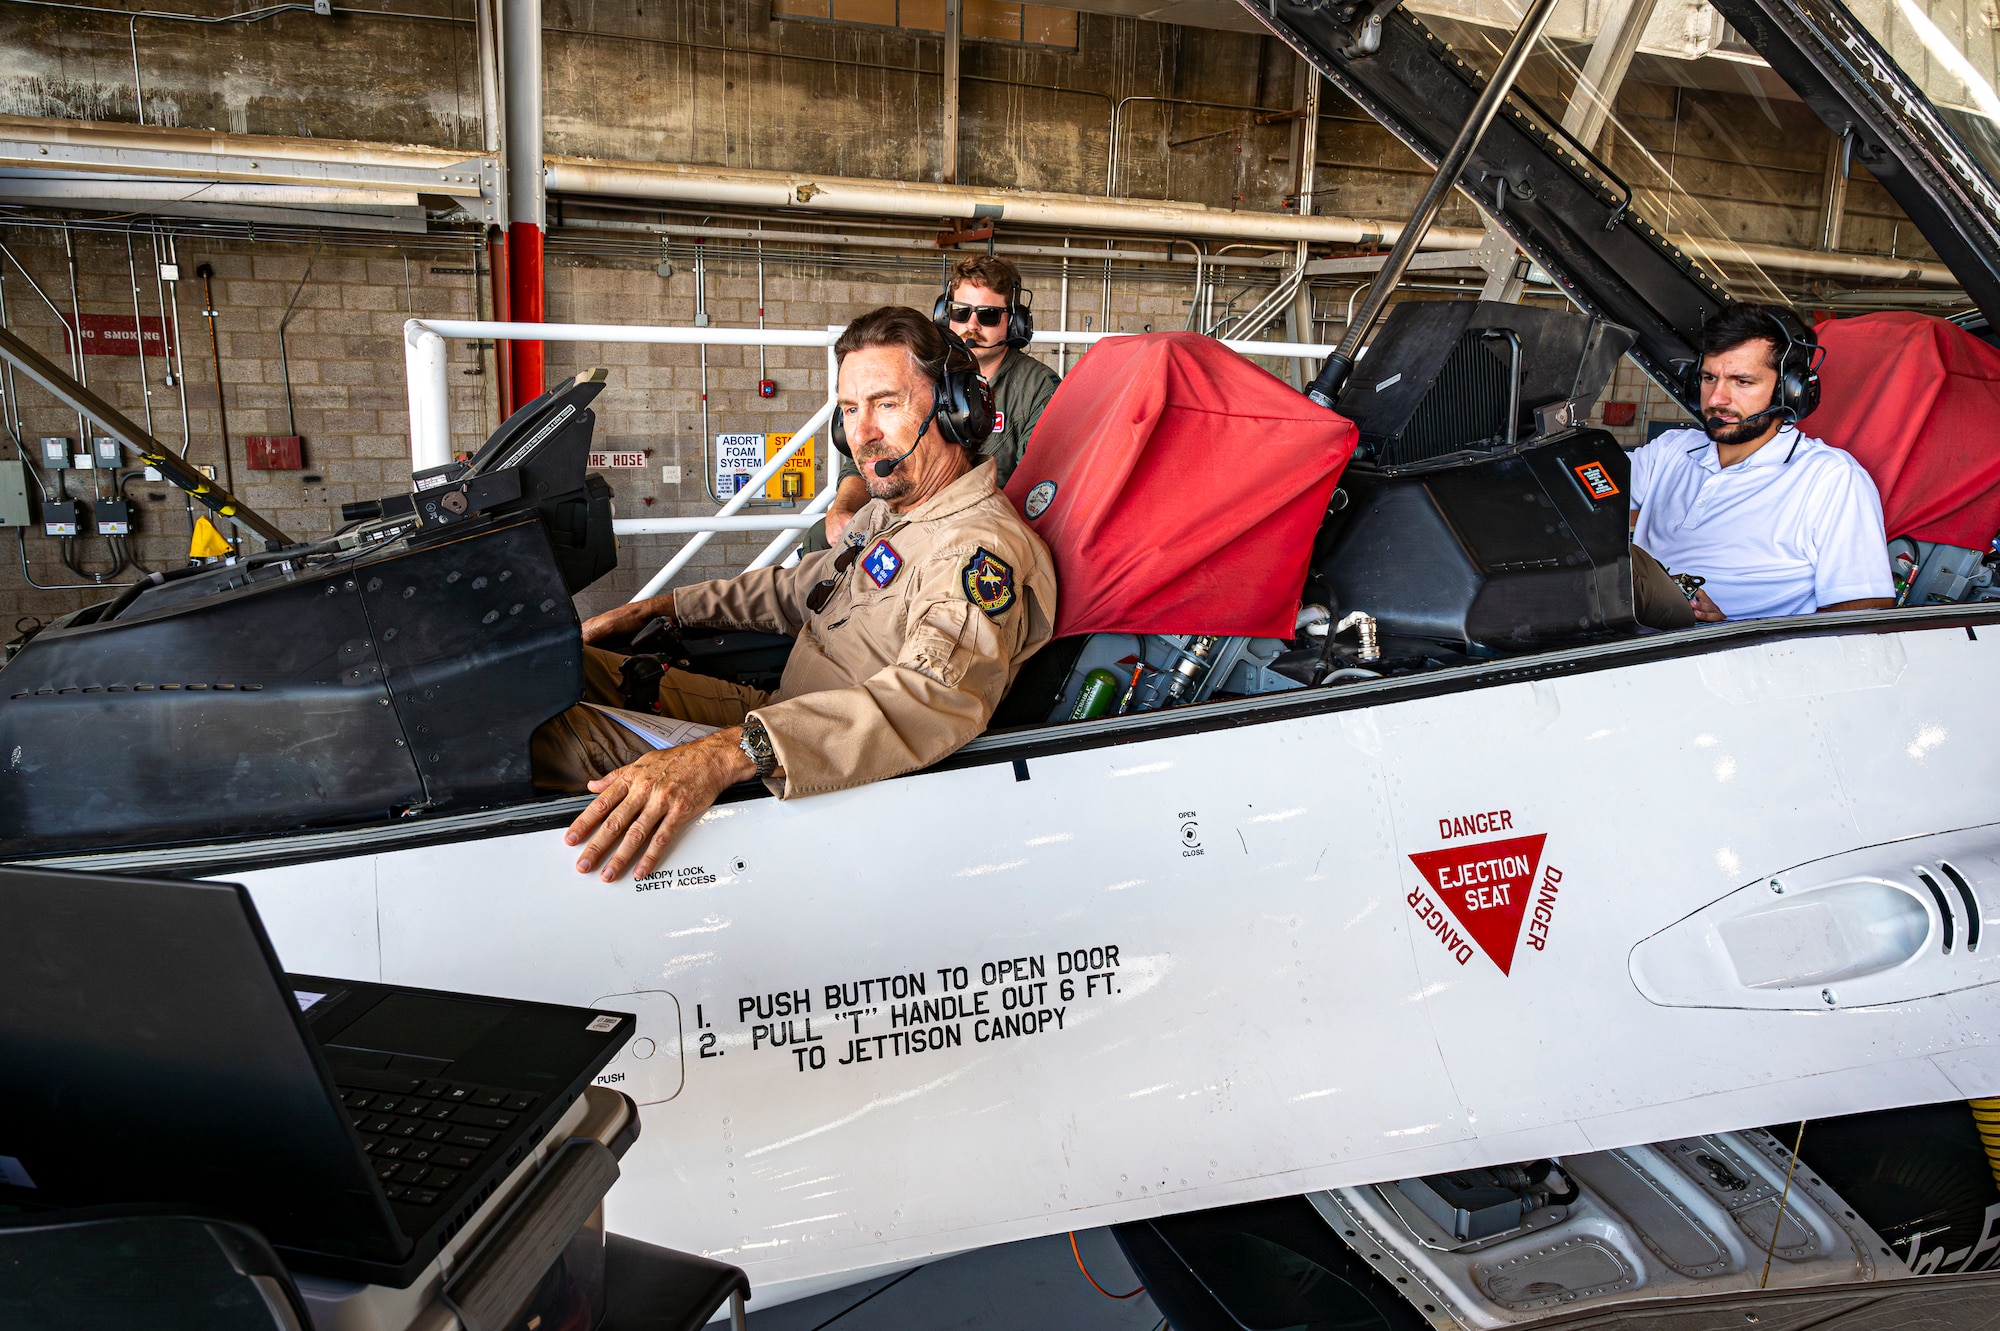 William Gray, Chief Test Pilot, Air Force Test Pilot School, and other engineers conduct software updates to the X-62 Variable Stability In-Flight Simulator Test Aircraft at Edwards Air Force Base, California, Aug. 3, 2022. (Air Force photo by Giancarlo Casem)